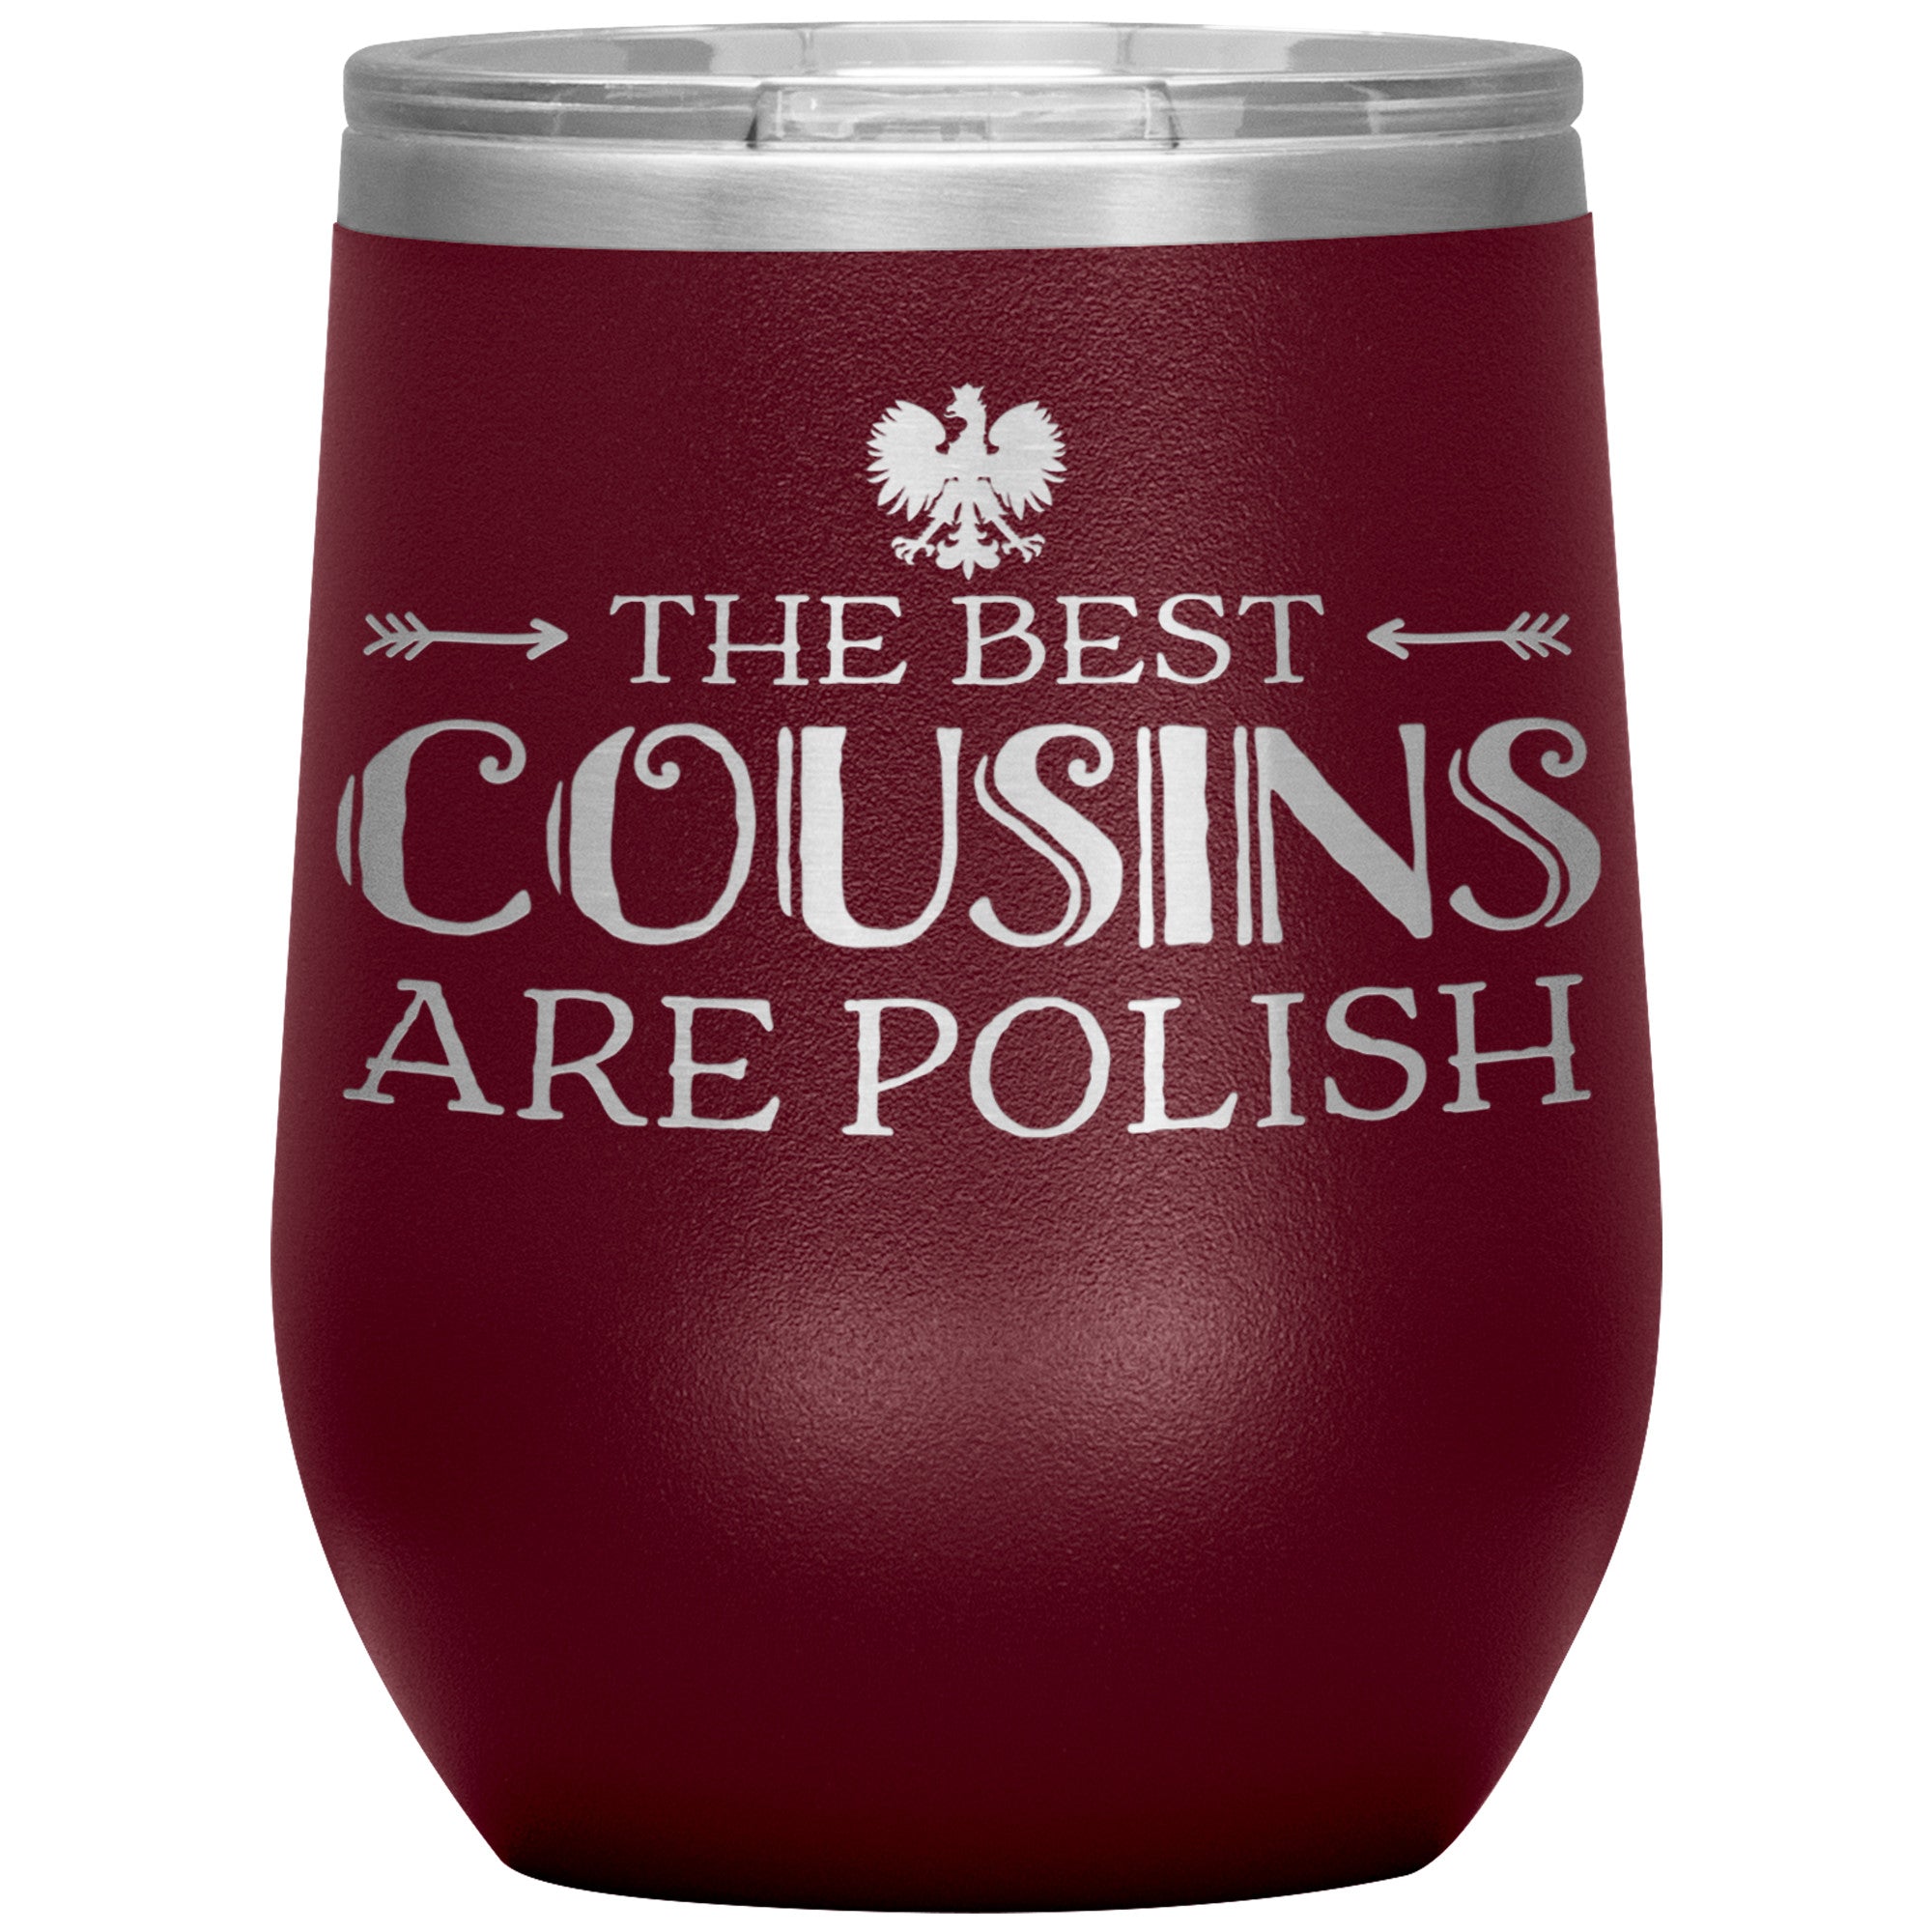 The Best Cousins Are Polish Insulated Wine Tumbler Tumblers teelaunch Maroon  